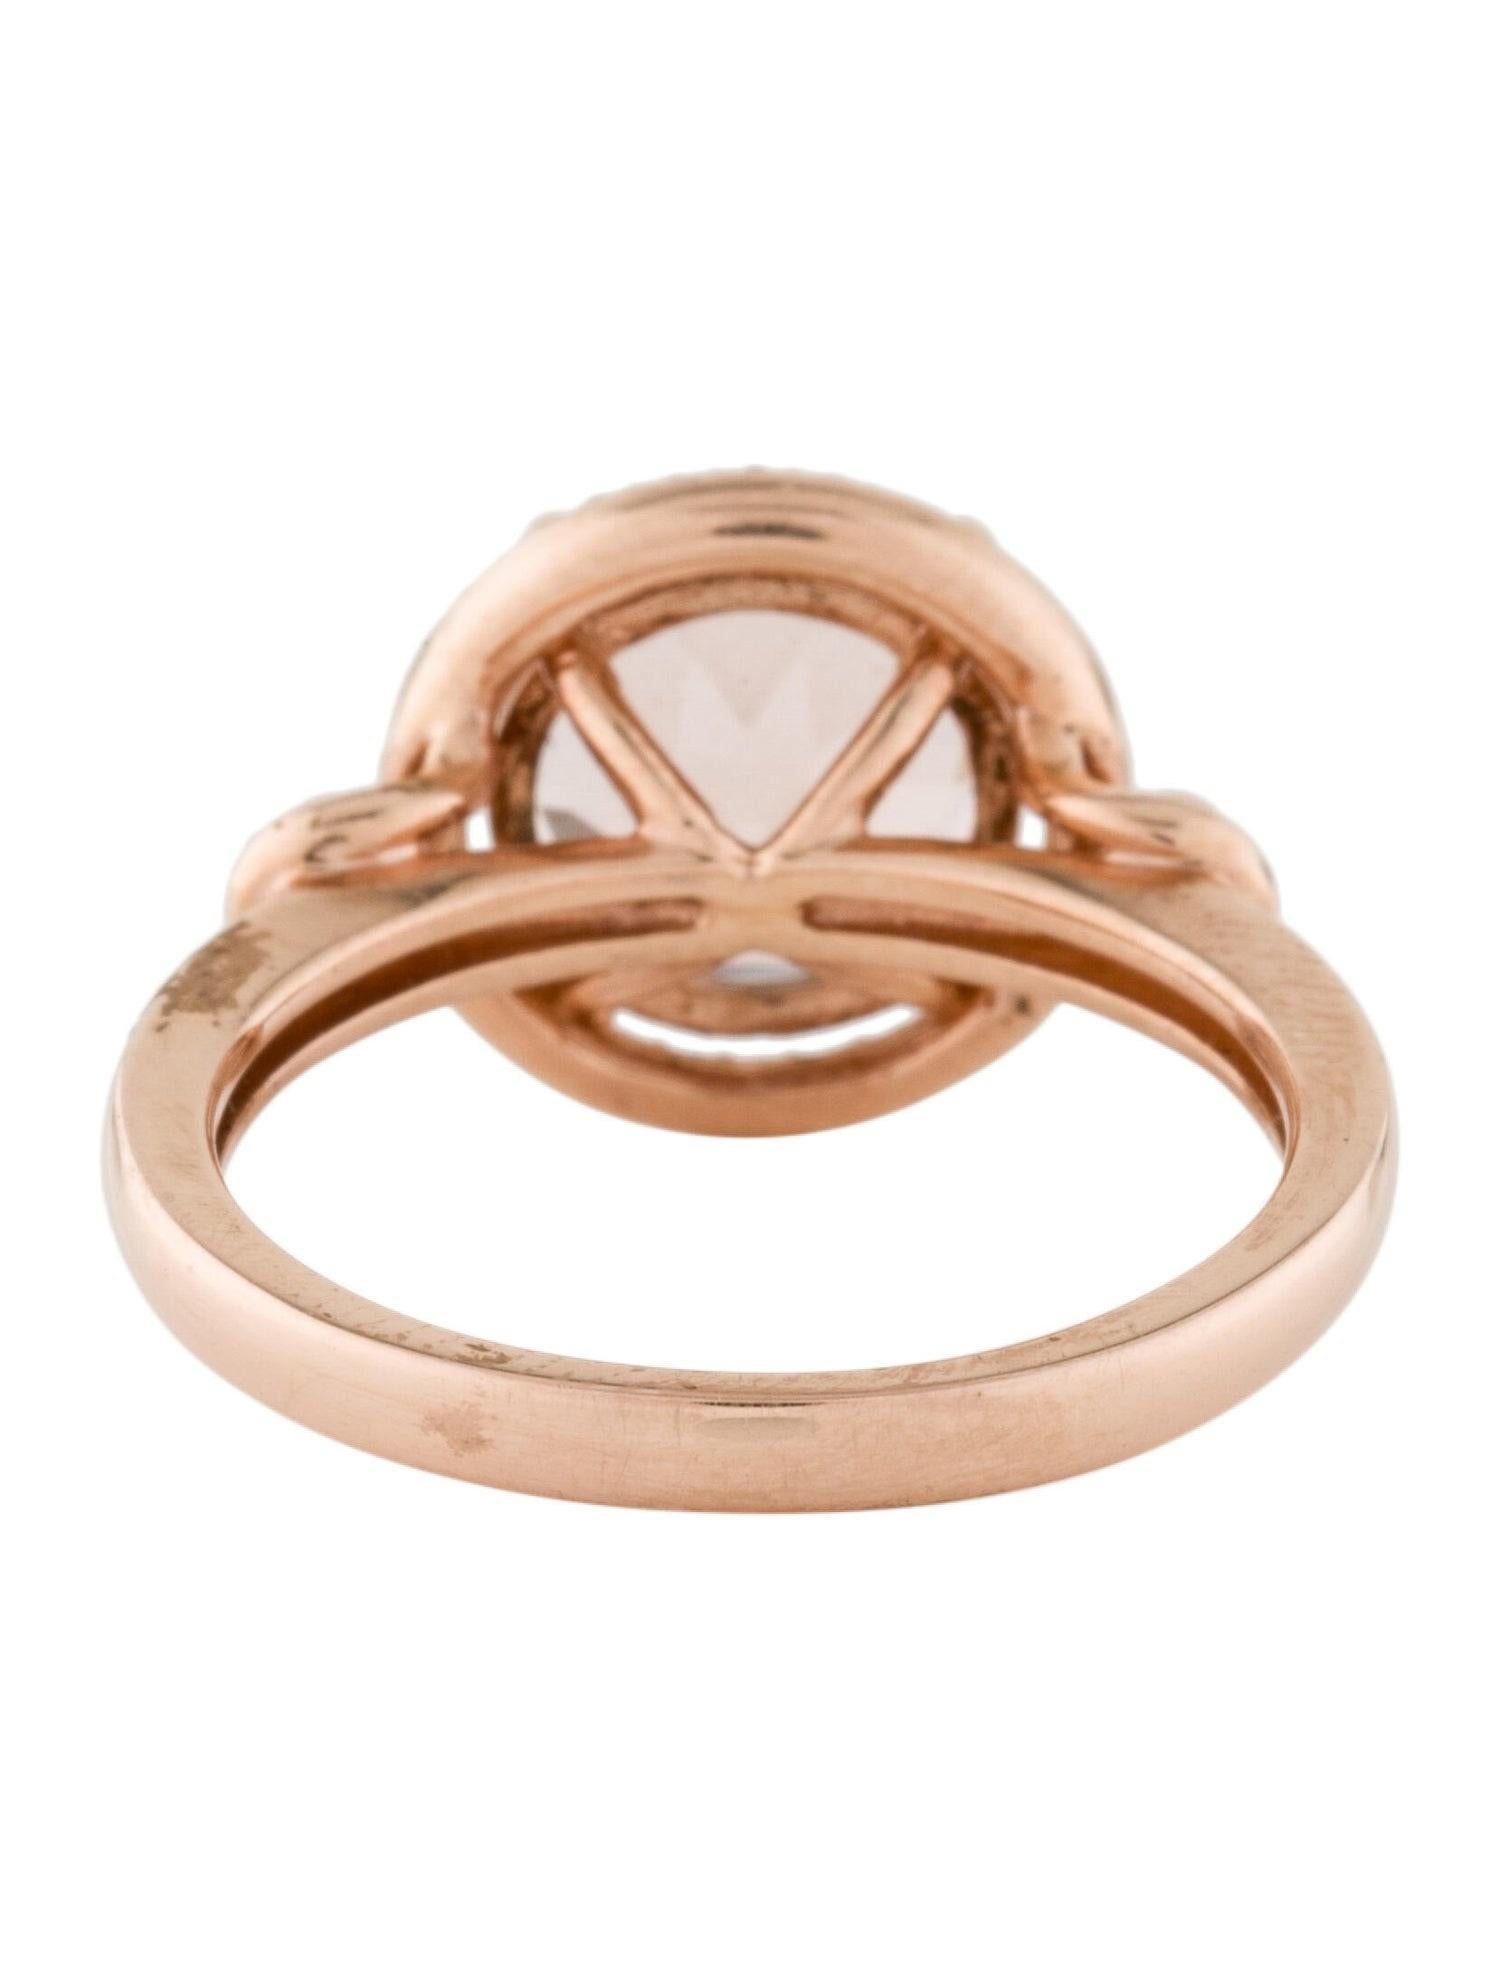 Round Cut 14K Rose Gold Morganite & Diamond Cocktail Ring For Sale